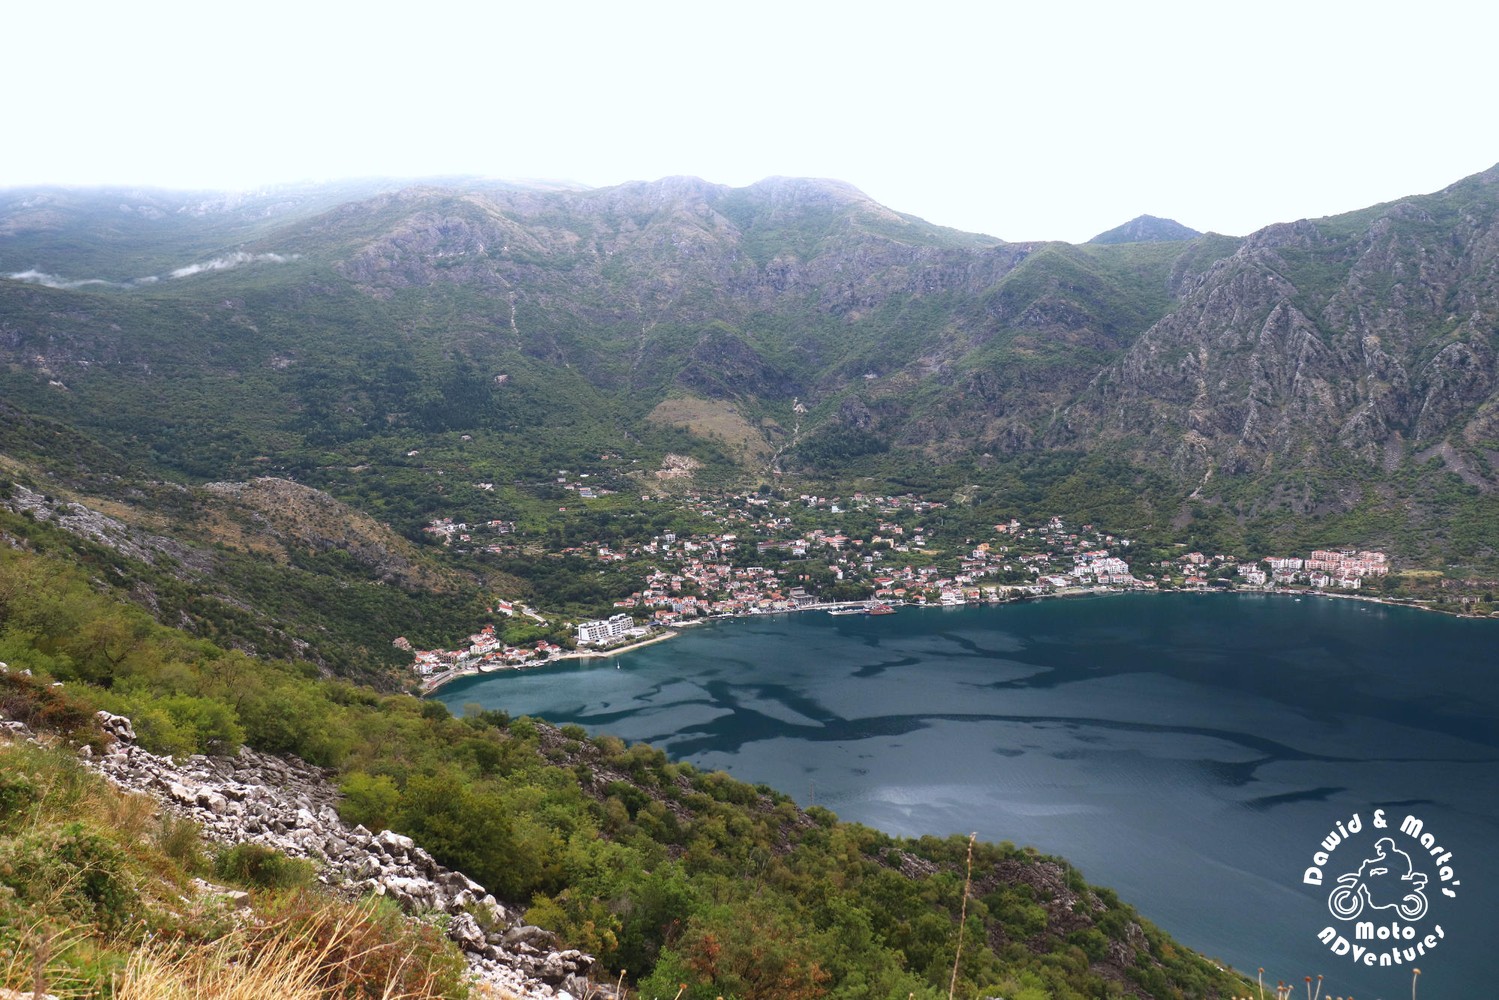 Kotor Bay in late September seen from P11 road